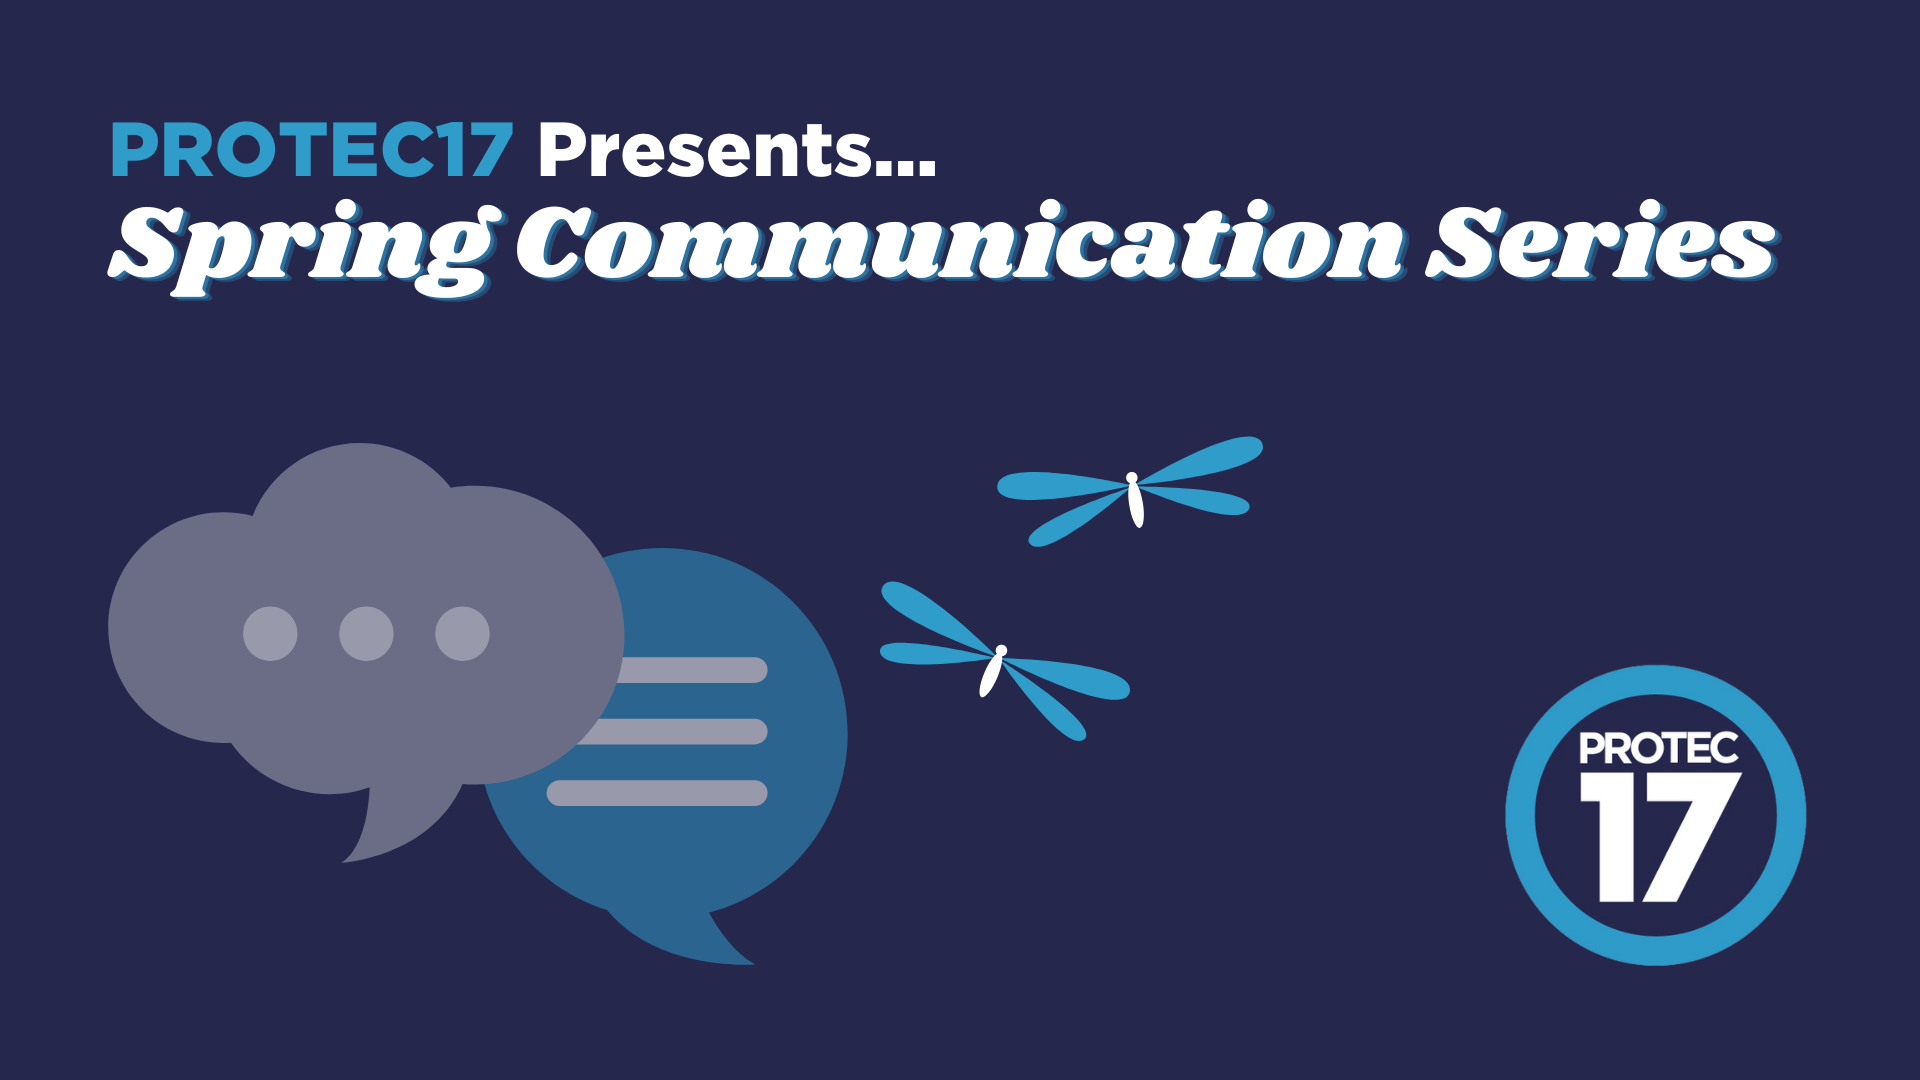 Banner image that reads, "PROTEC17 PRESENTS: Spring Communication Series." There are simple illustrations of chat bubbles and dragonflies. The PROTEC17 logo is in the bottom right.